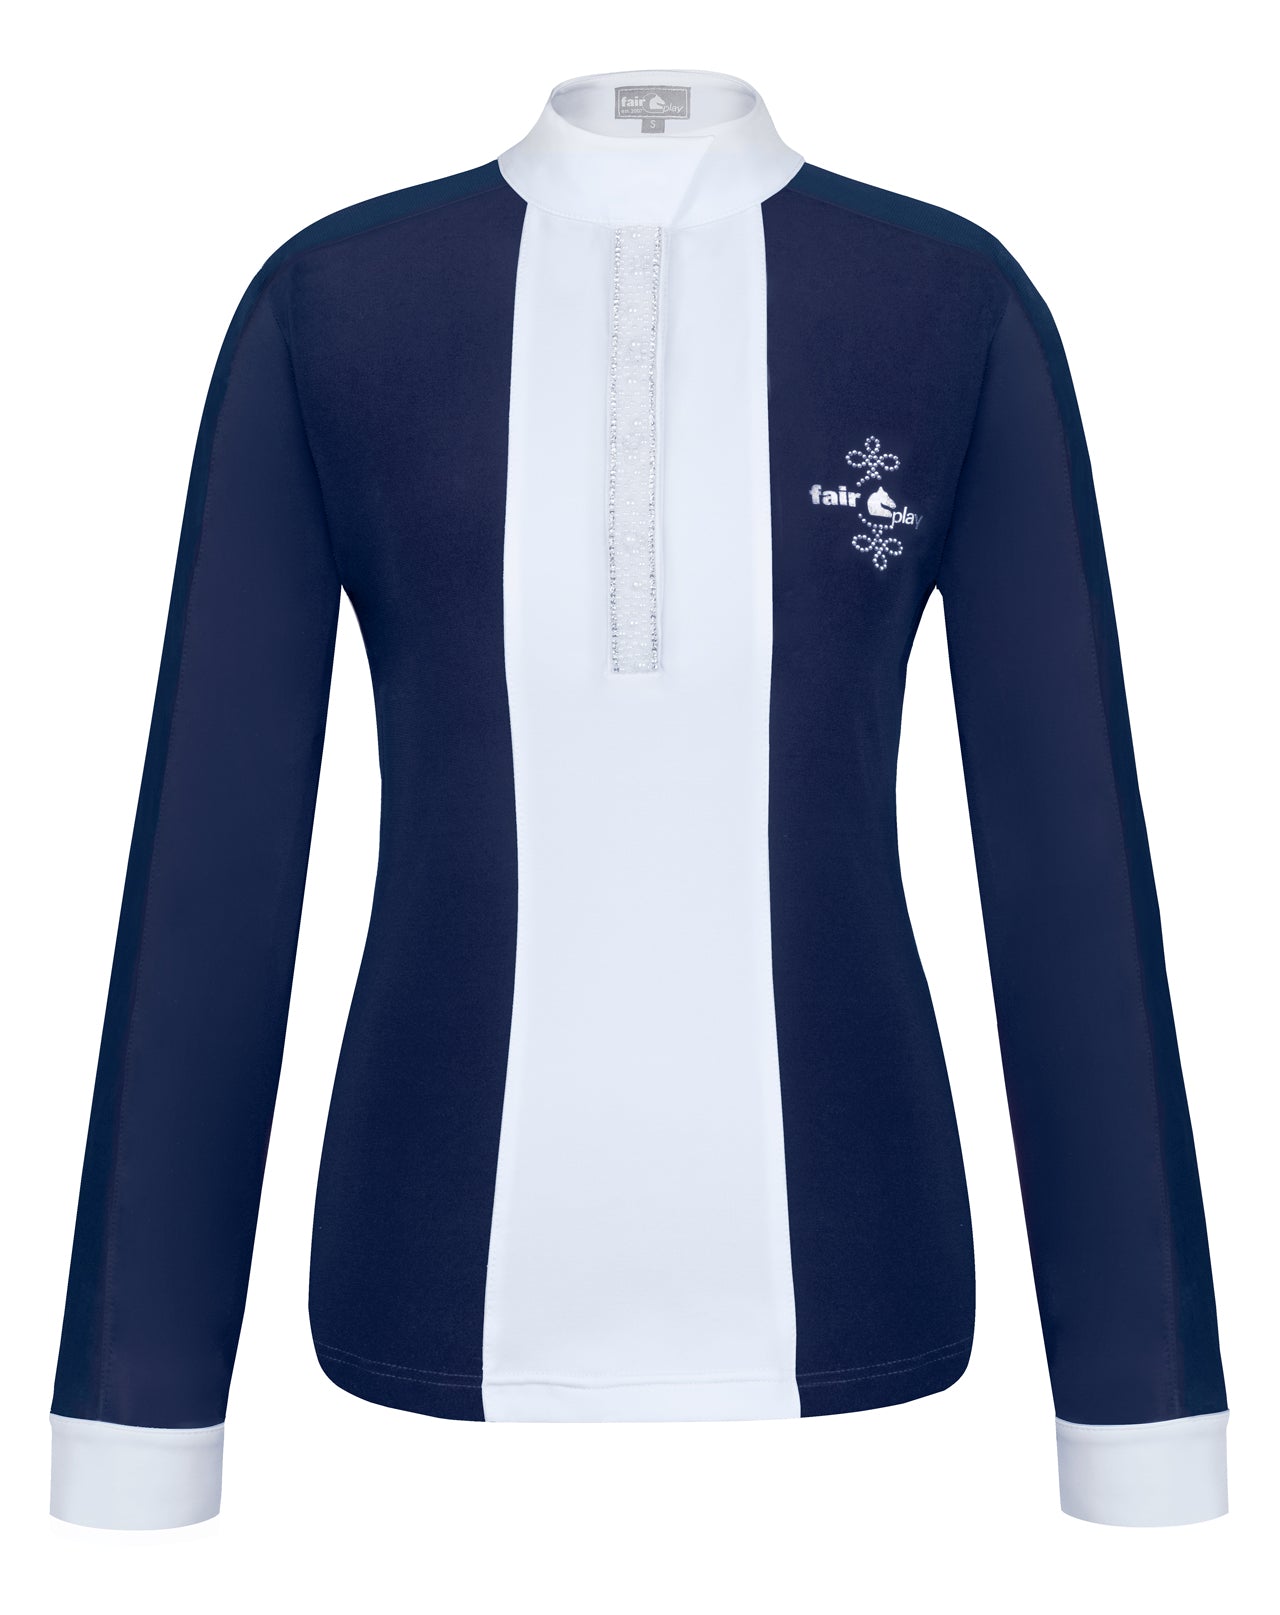 Navy show shirt for ladies